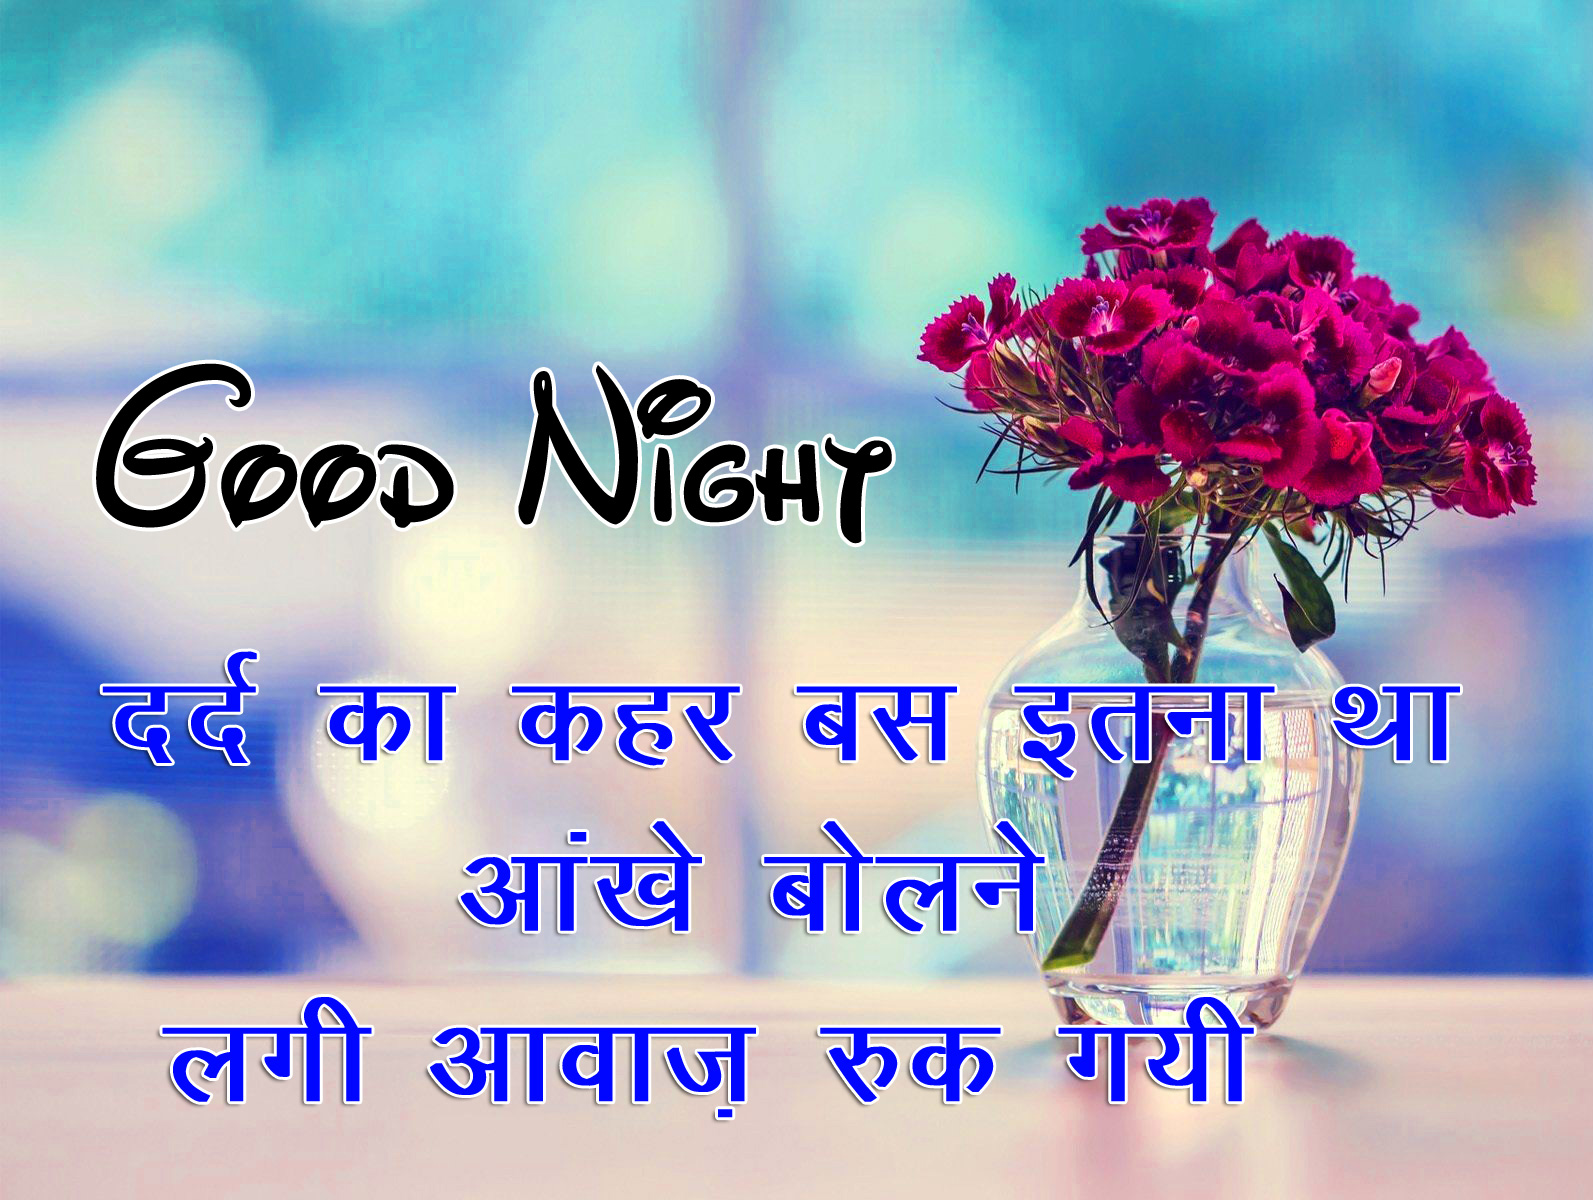 Hindi Good Night Wishes Images Download